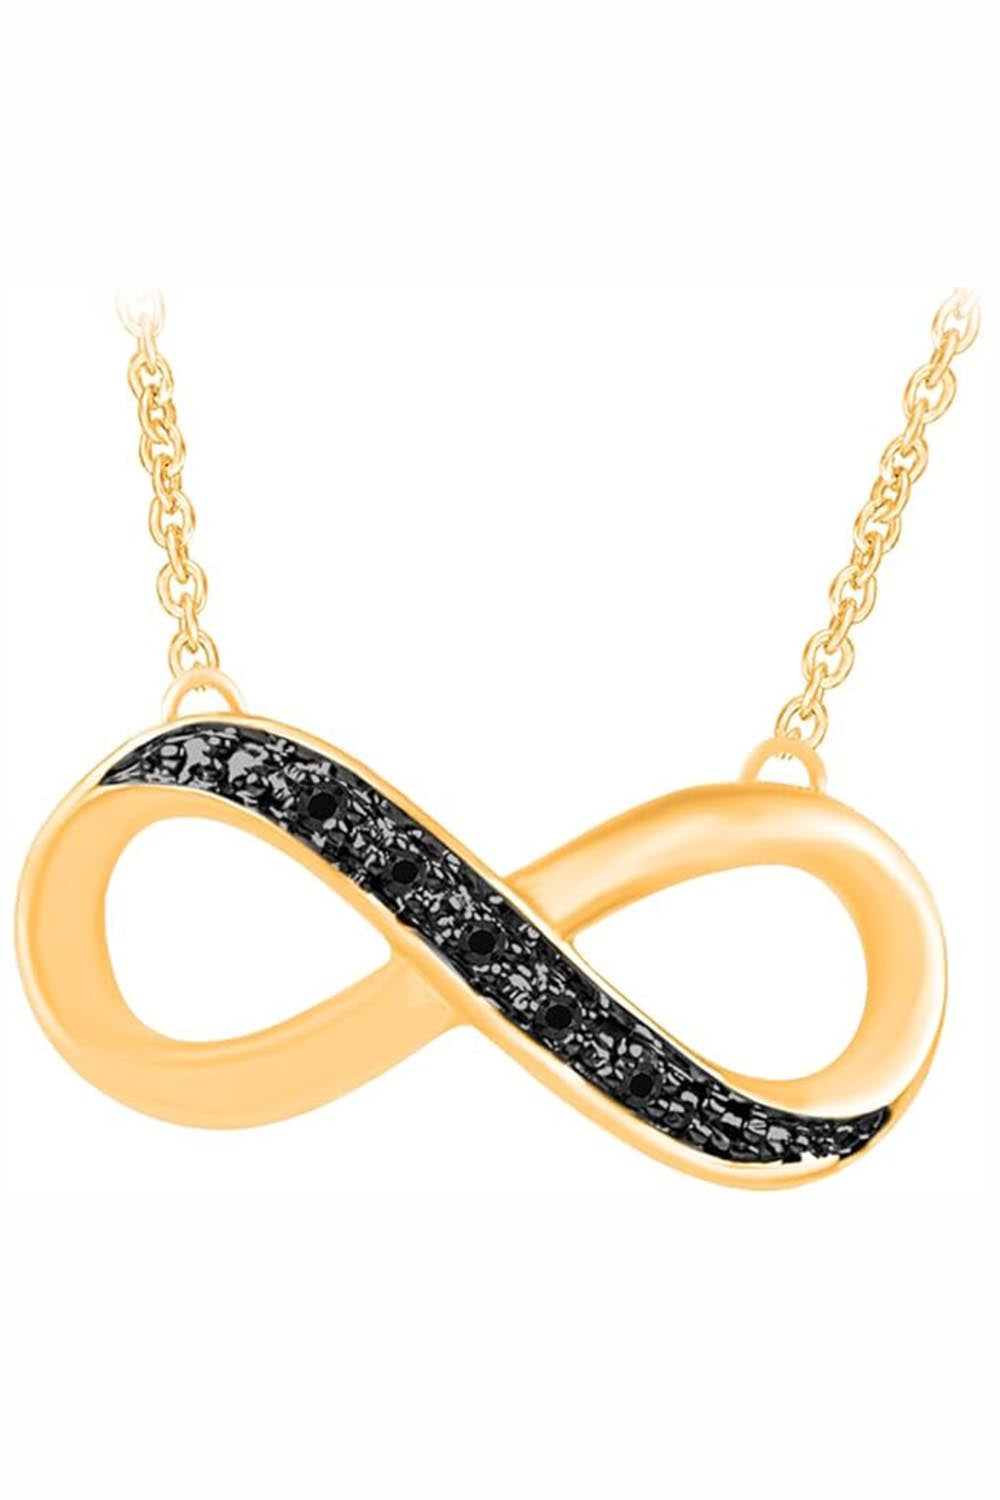 Yellow Gold Color Yaathi Black Infinity Necklace, Pendant for Women 